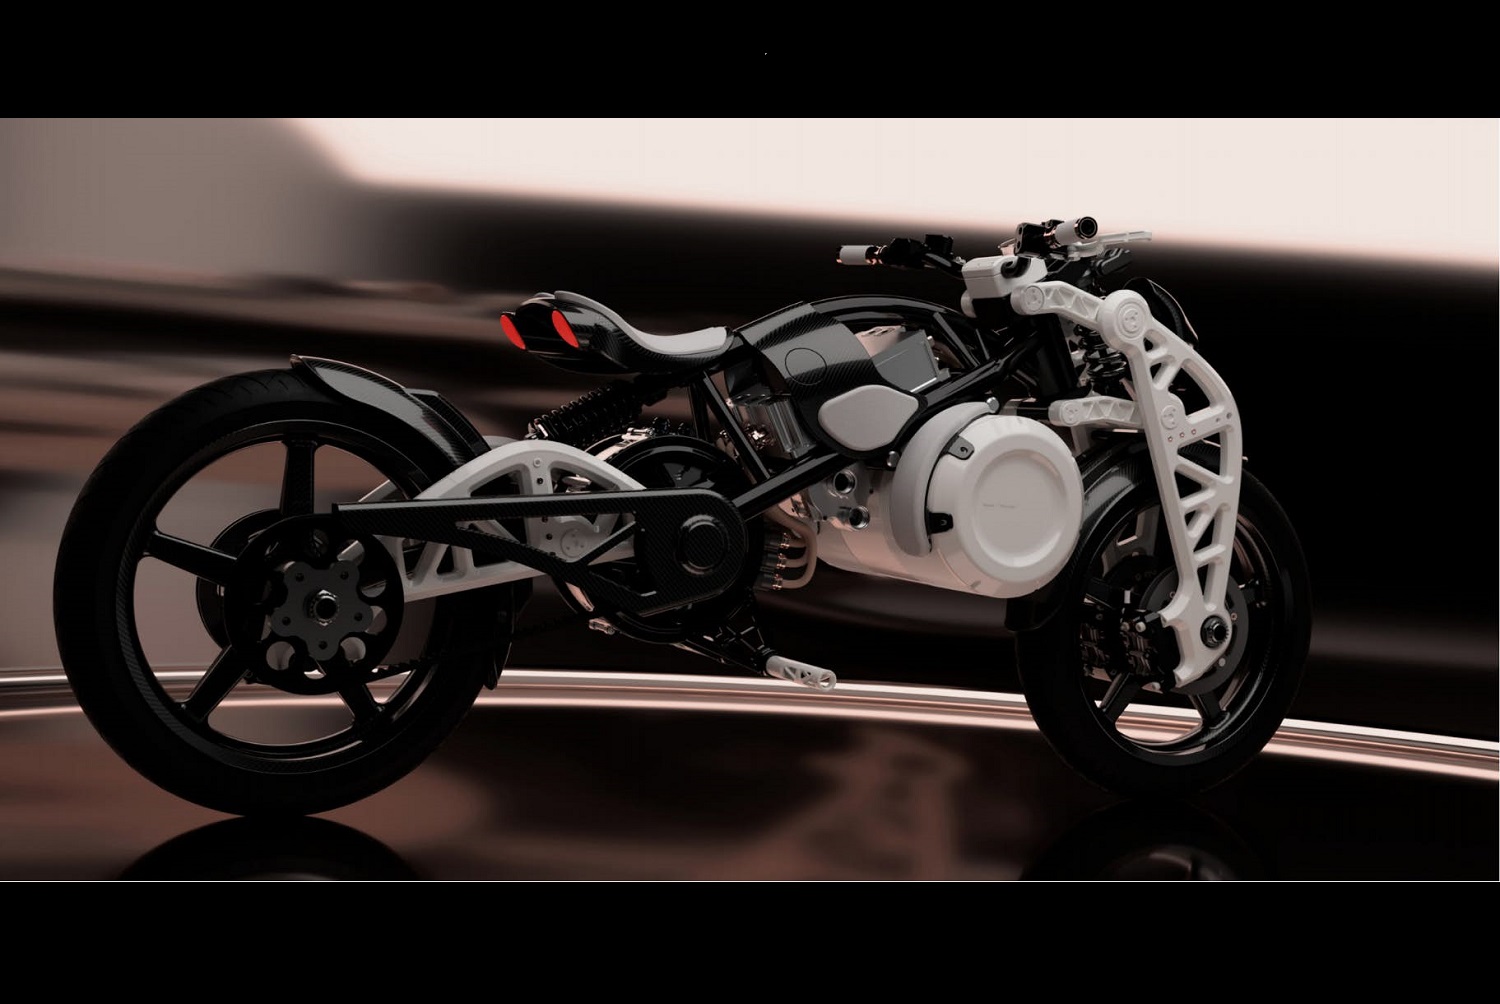 curtiss motorcycles plans psyche electric bike with 160 mile range motorcycle 3